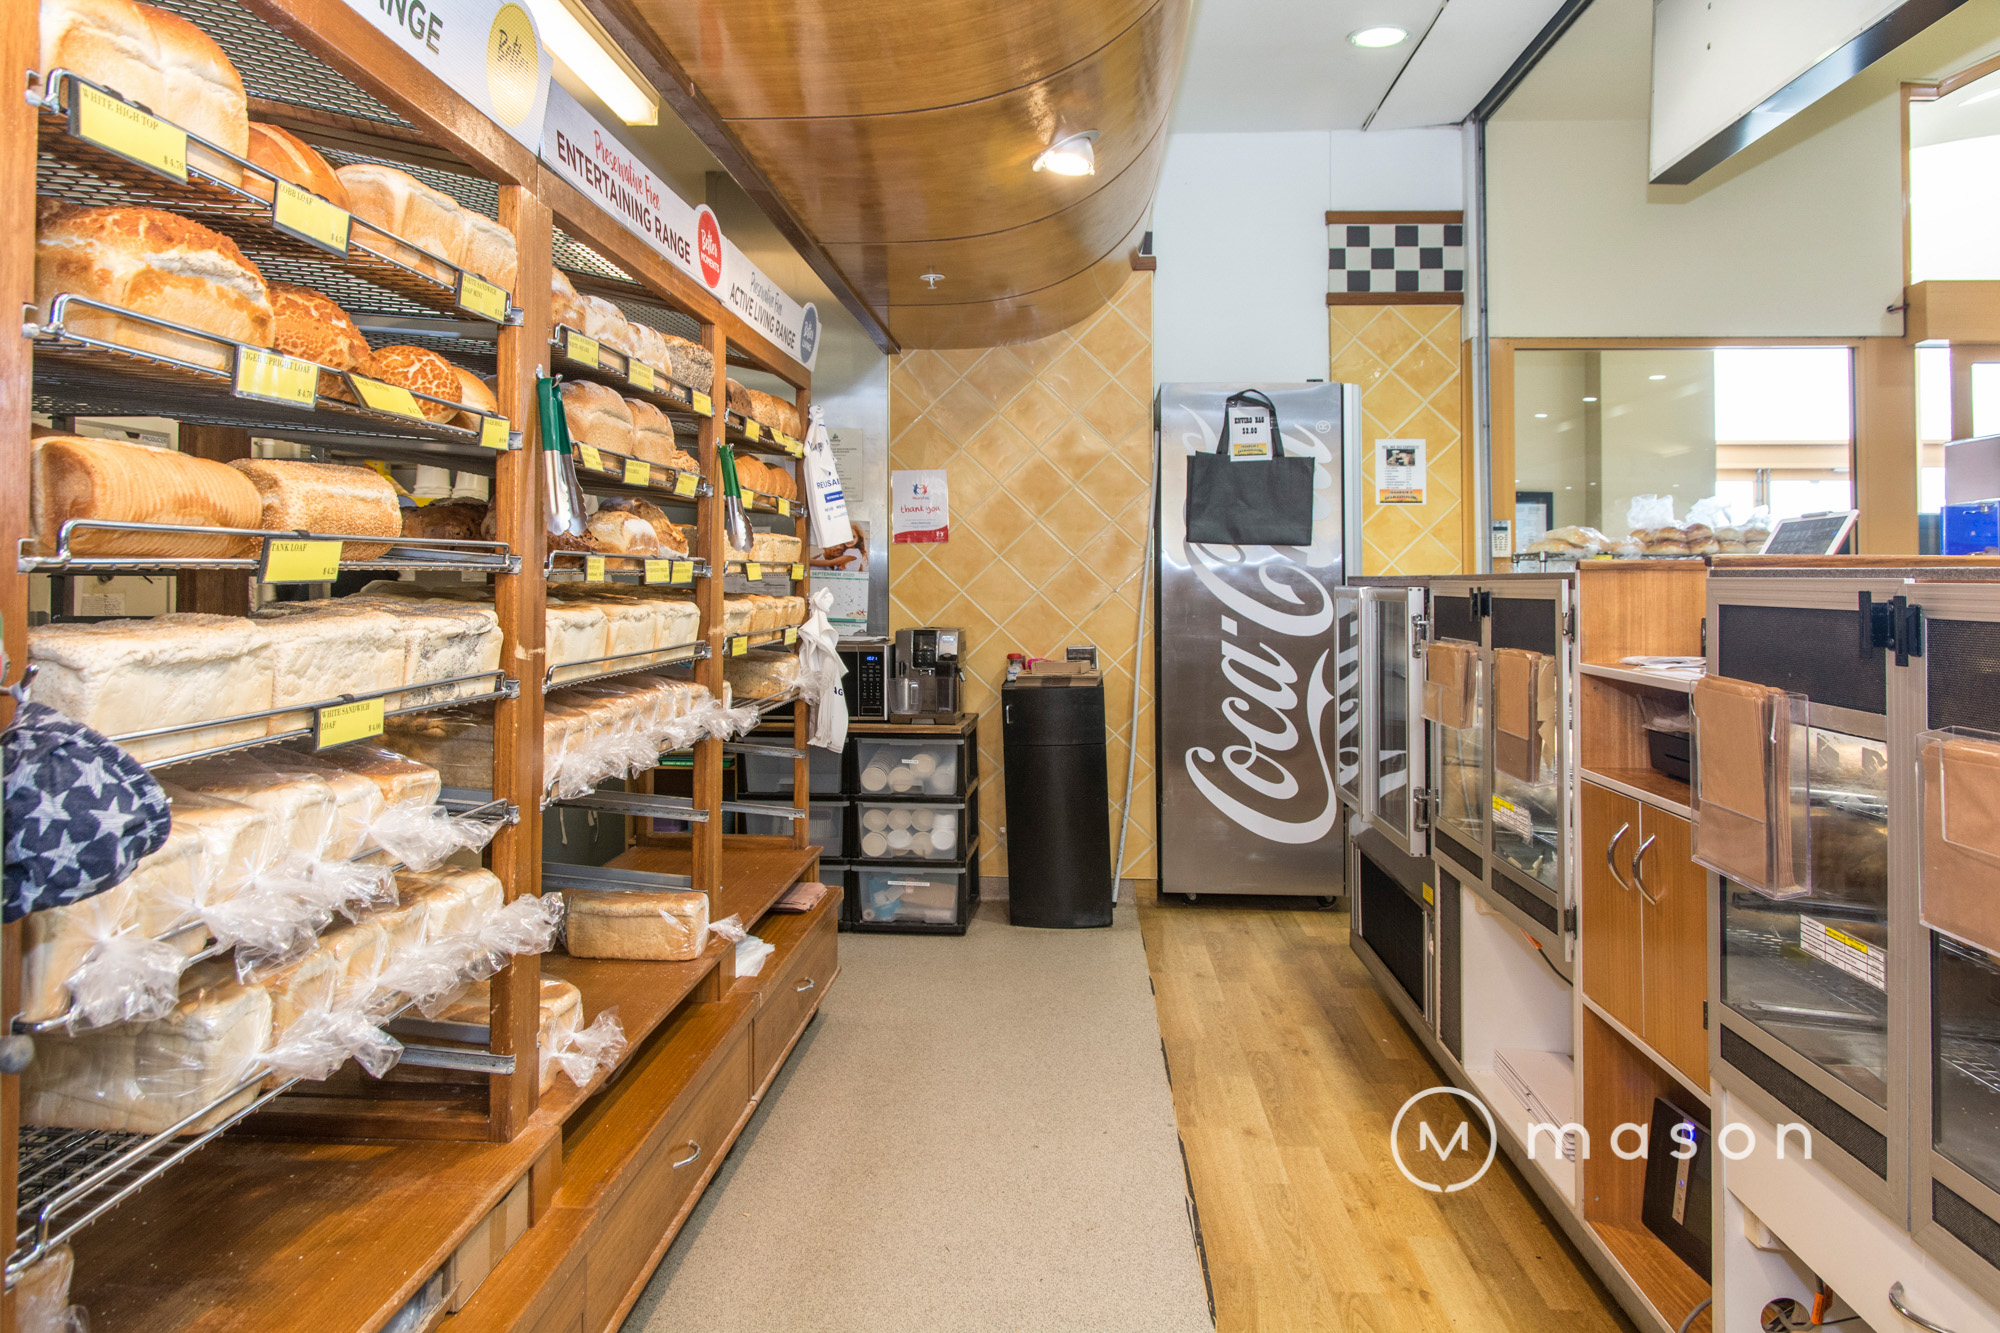 Albany Bakery For Sale - Shopping Centre Location image 4